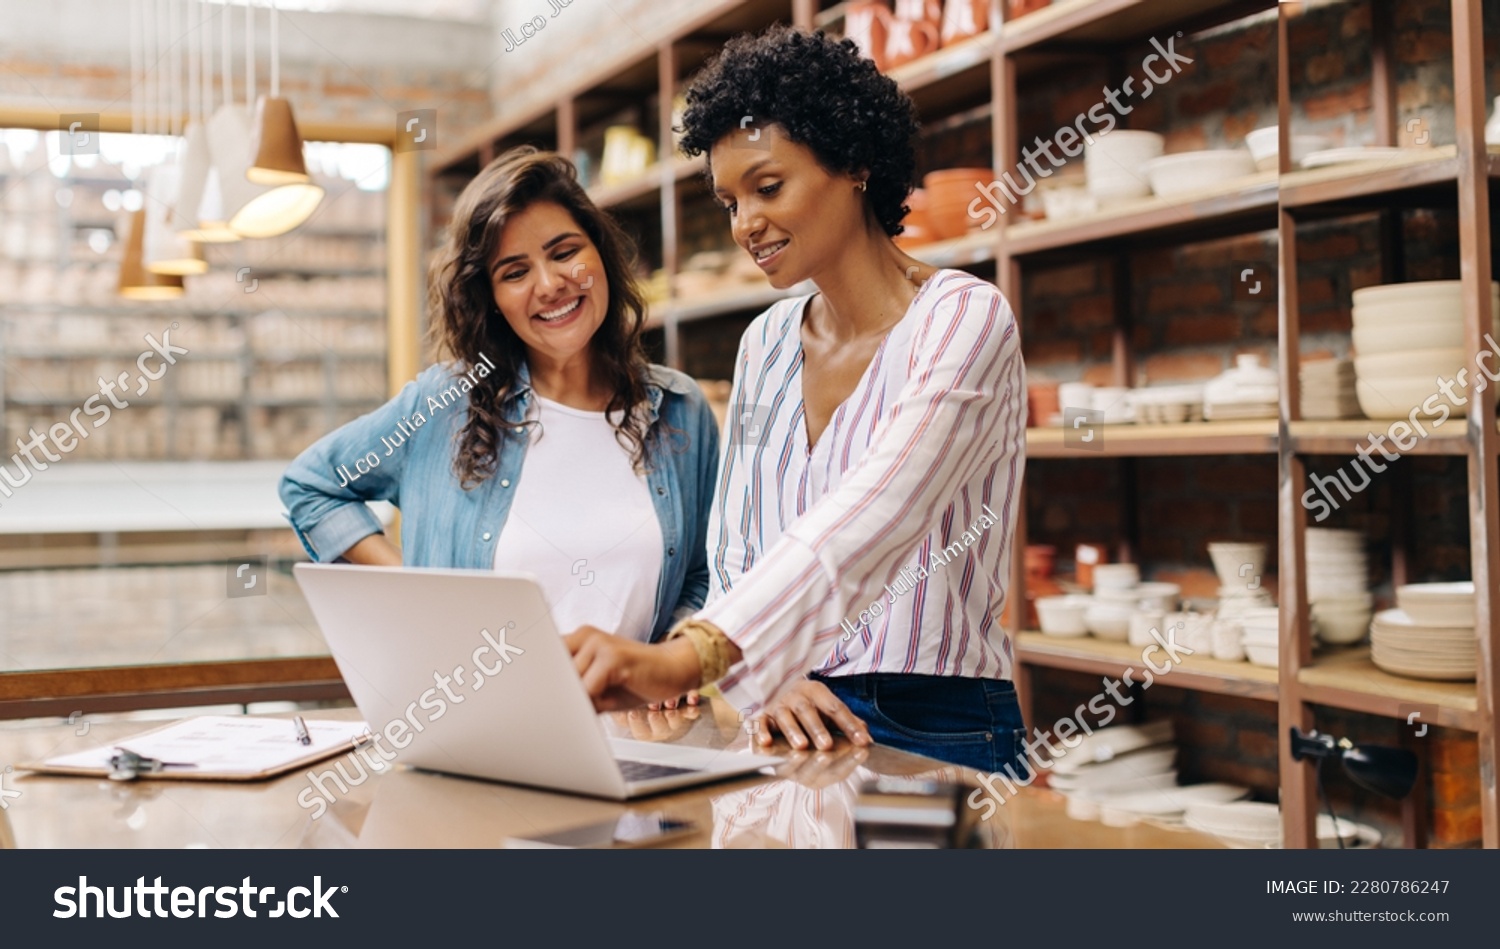 Successful female ceramists using a laptop while working together. Two female entrepreneurs managing online orders in their store. Happy young businesswomen running a creative small business together. #2280786247